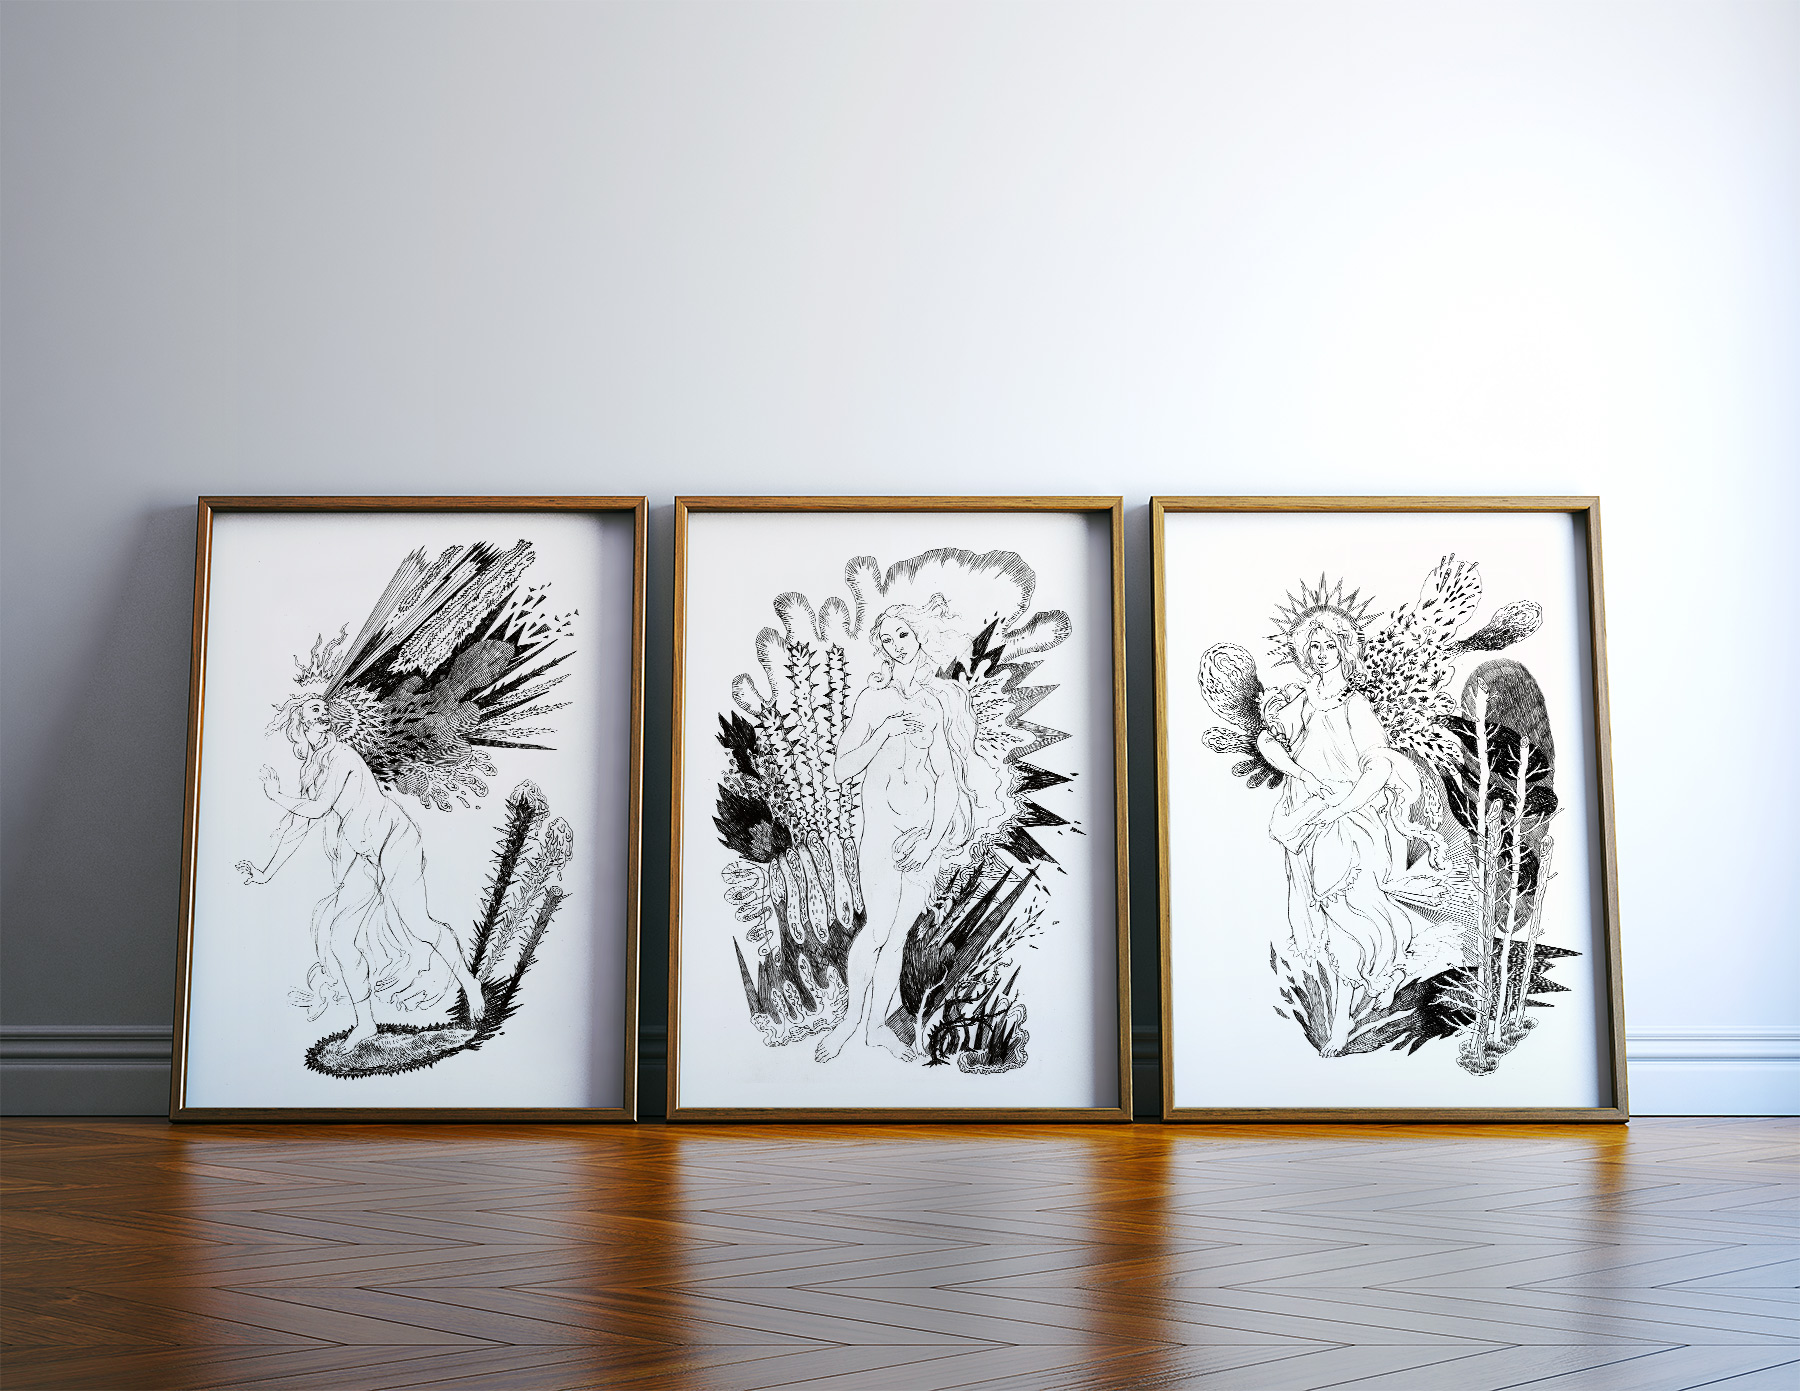 art-prints, gliceé, aesthetic, figurative, monochrome, portraiture, bodies, botany, patterns, sexuality, black, white, ink, paper, beautiful, black-and-white, copenhagen, danish, decorative, design, flowers, interior, interior-design, love, nordic, nude, scandinavien, Buy original high quality art. Paintings, drawings, limited edition prints & posters by talented artists.